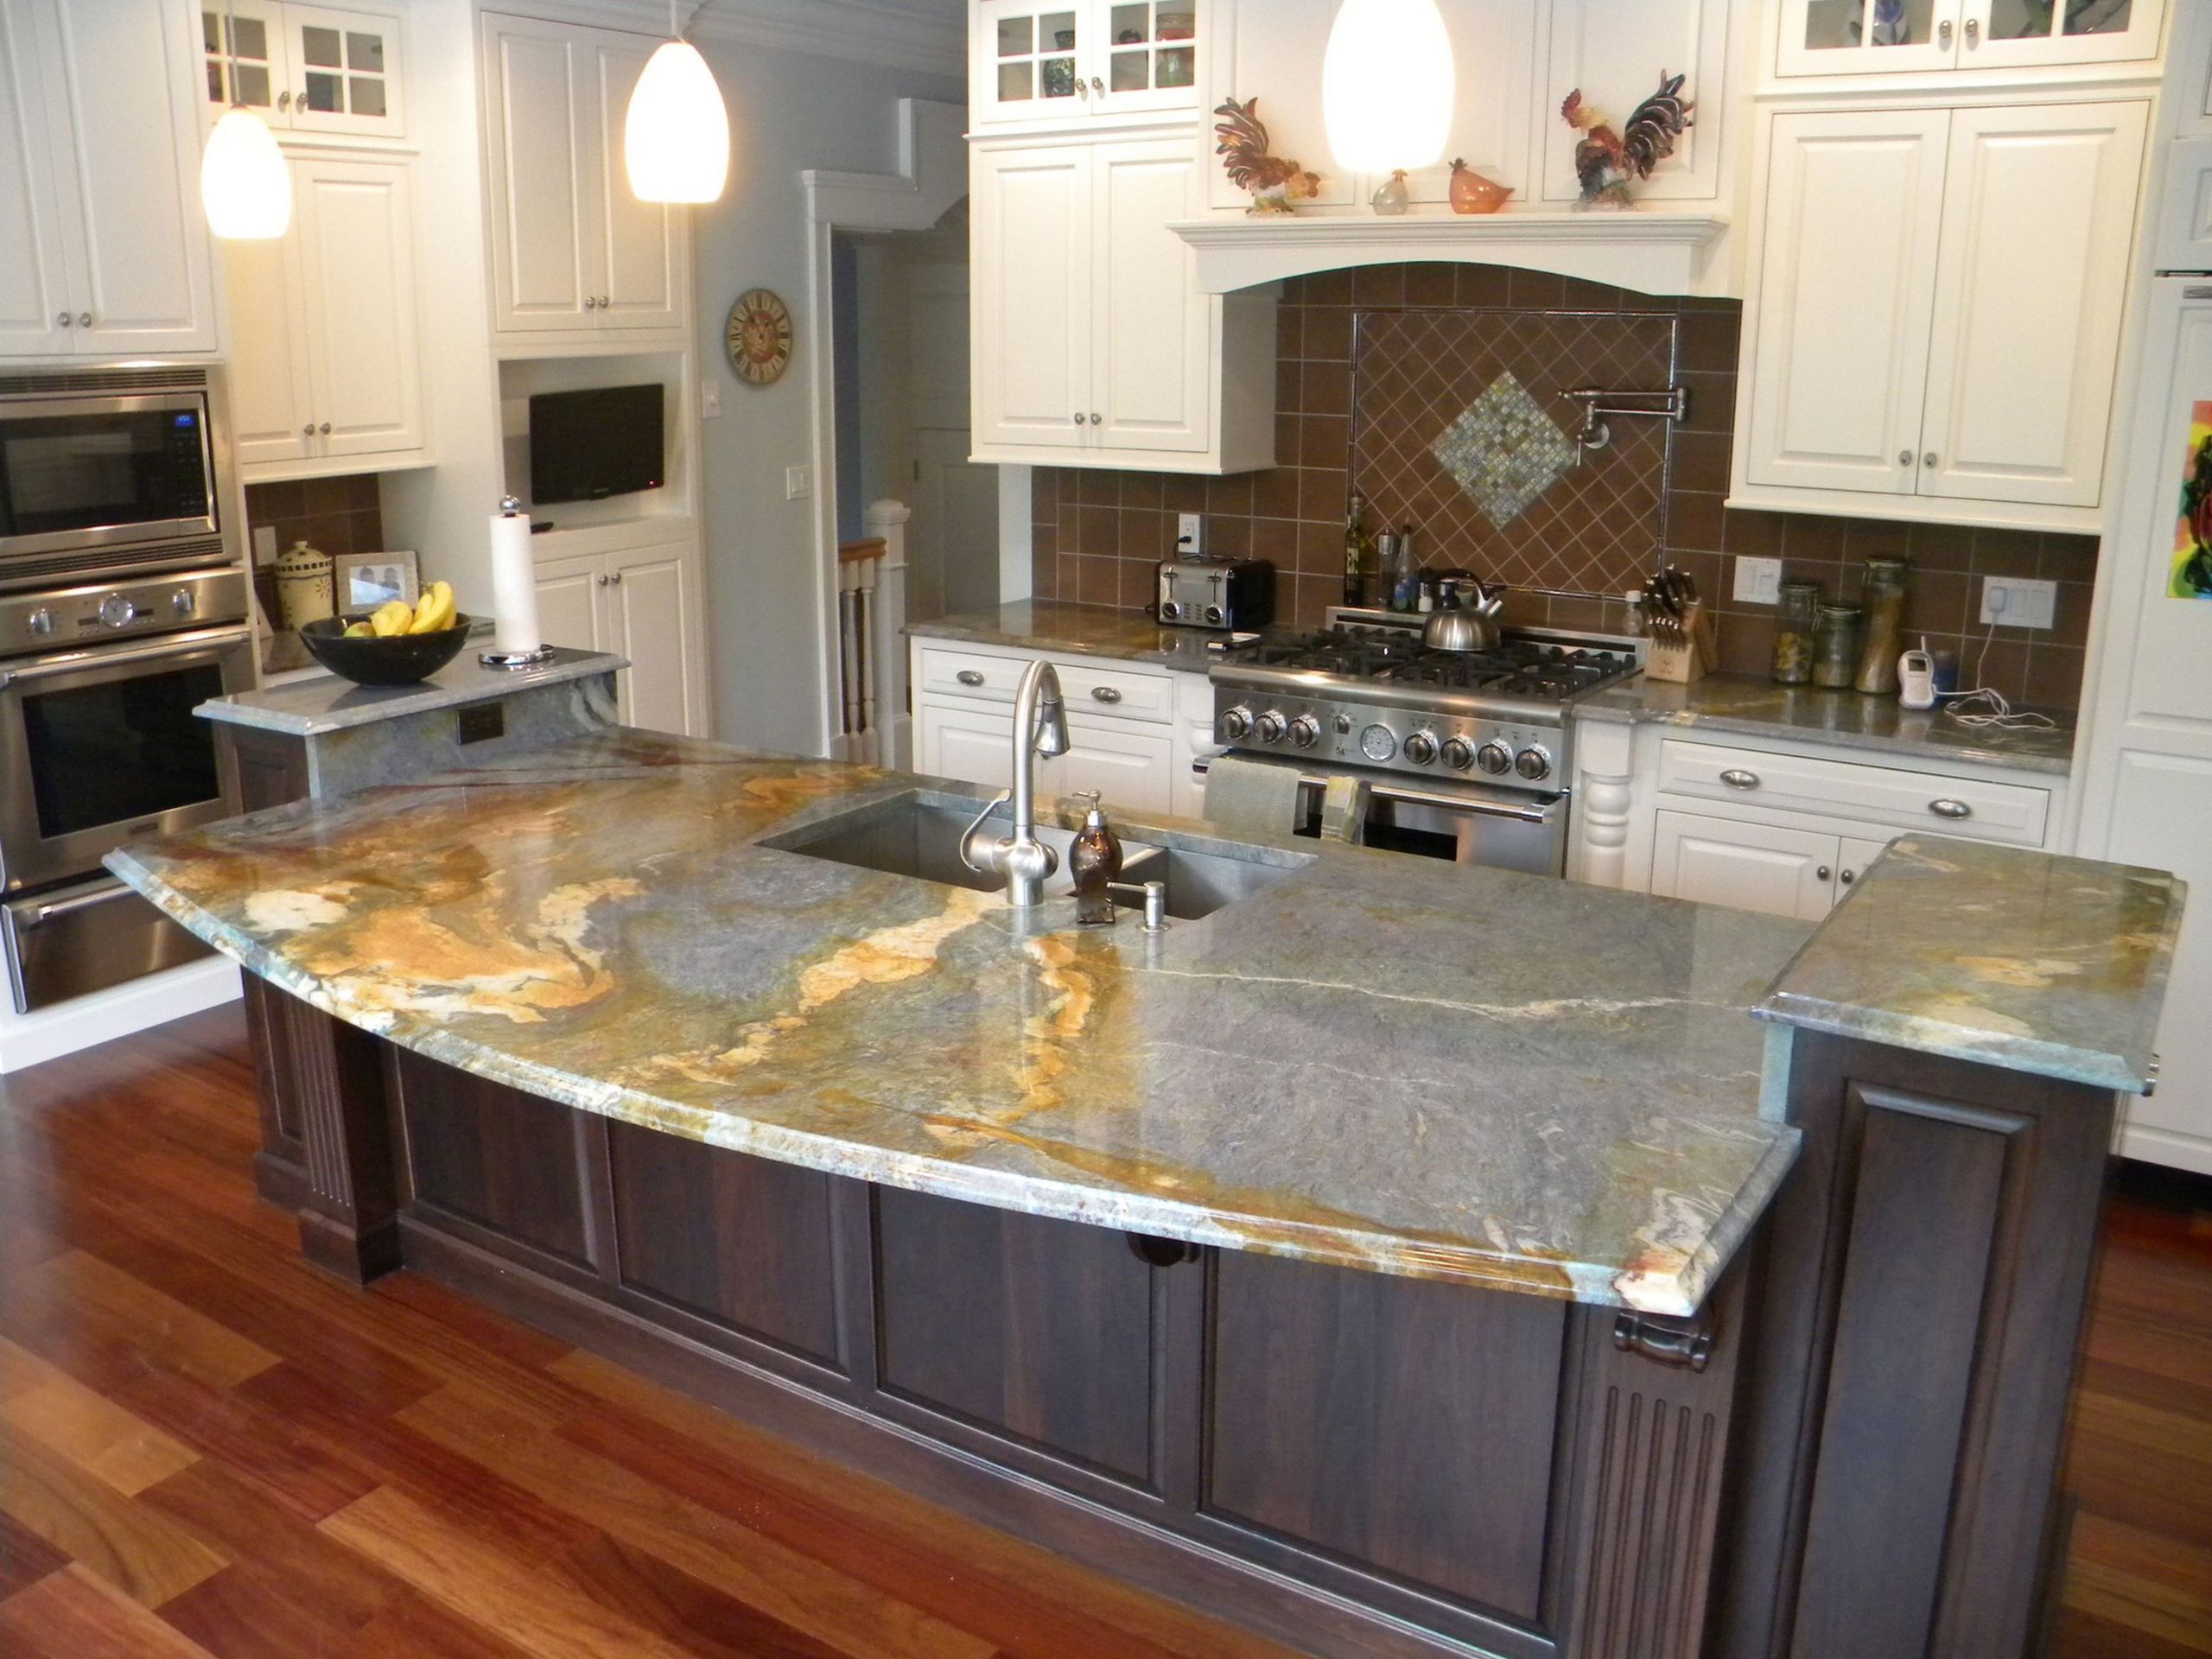 Kitchen Countertops Lowes
 Luxurious Lowes Kitchen Design for Home Interior Makeover